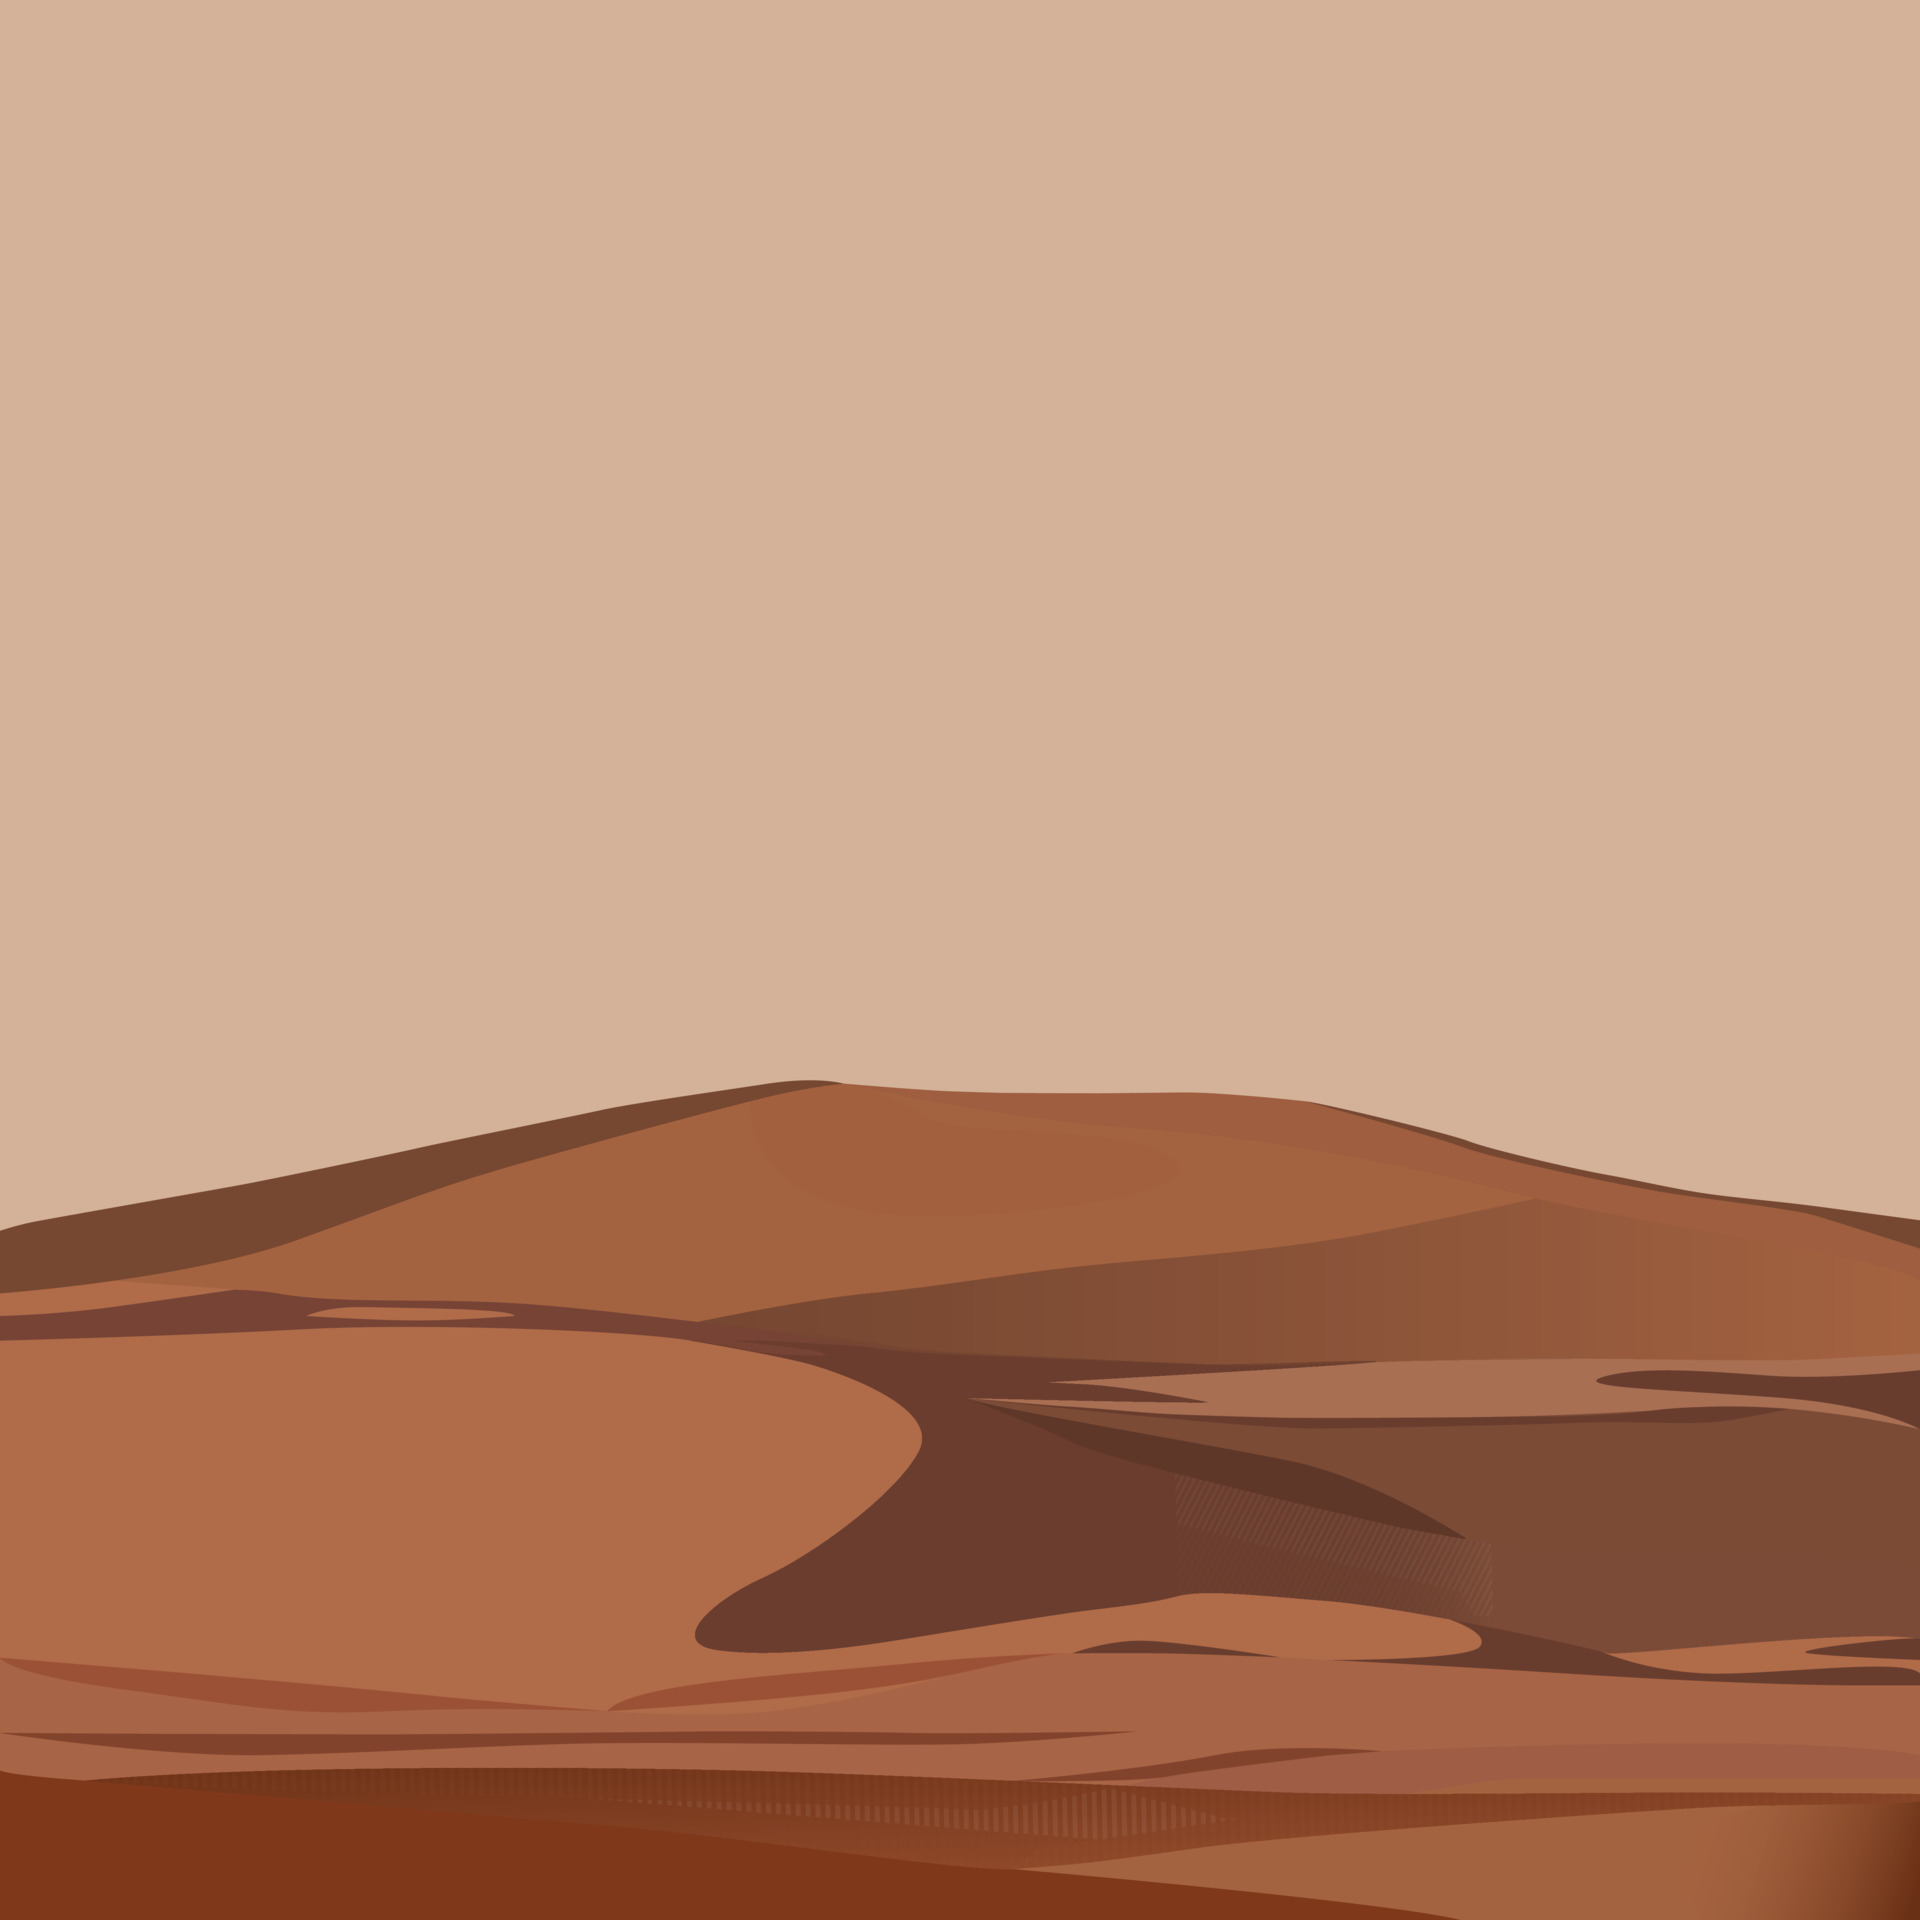 Arizona Desert Vector Art, Icon, and Graphics for Free Download